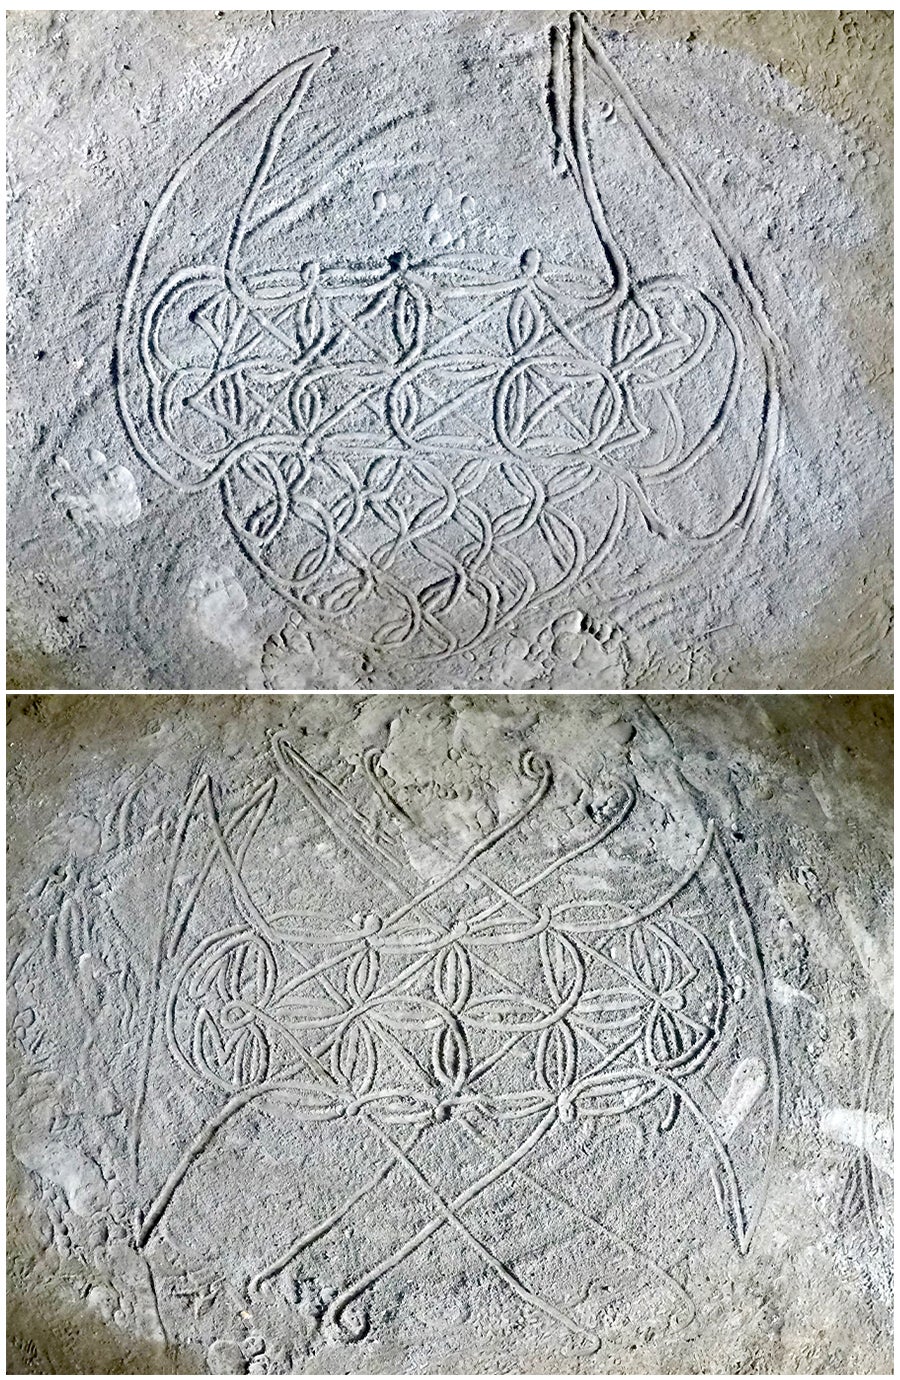 Two images of sand drawings